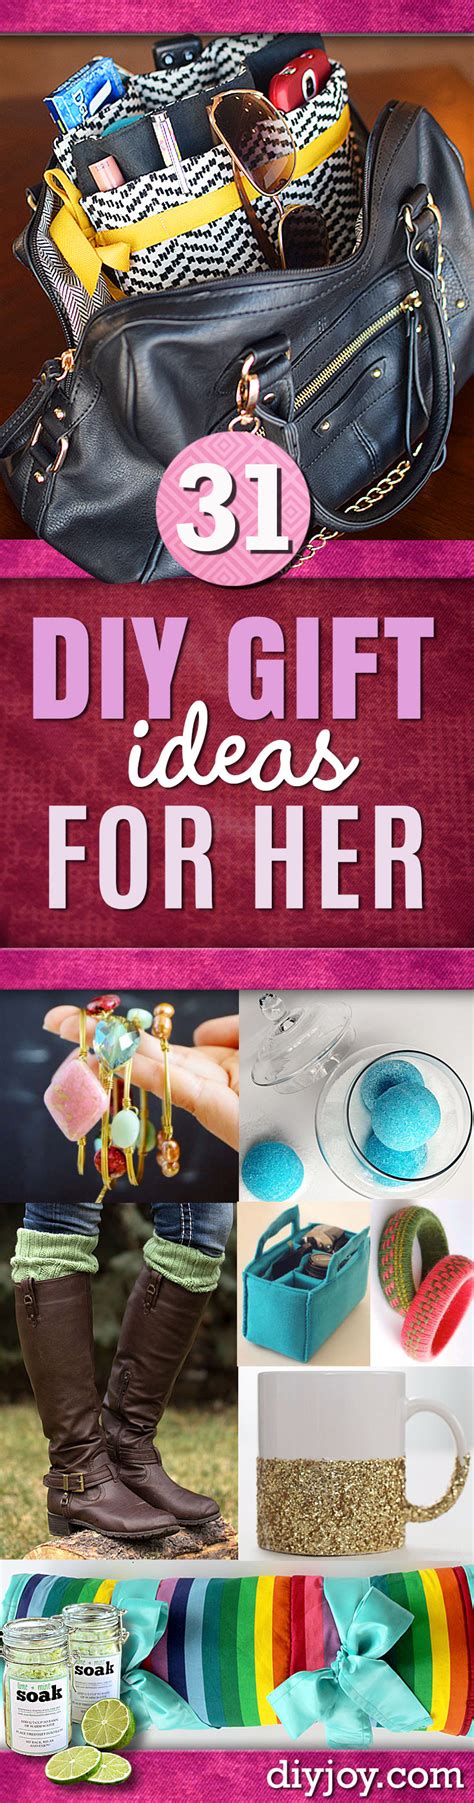 Awesome homemade birthday gifts for you to make, including fabulous gift ideas for milestone birthdays. DIY Gift Ideas for Her